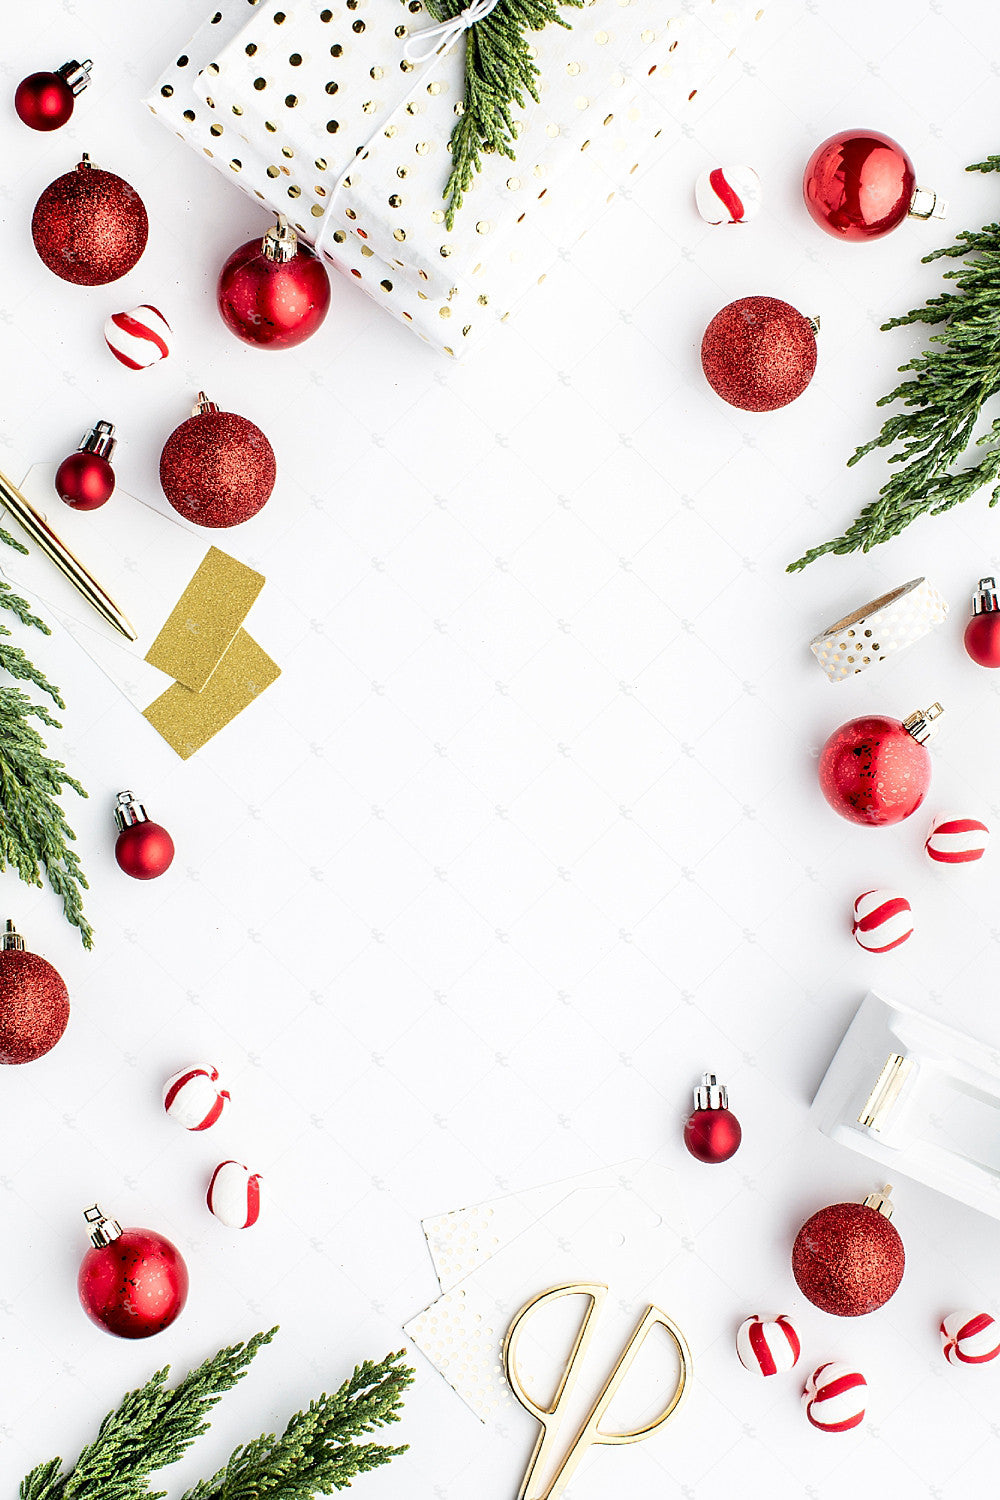 New: Styled Holiday Stock Photography for Creatives! – SC Stockshop